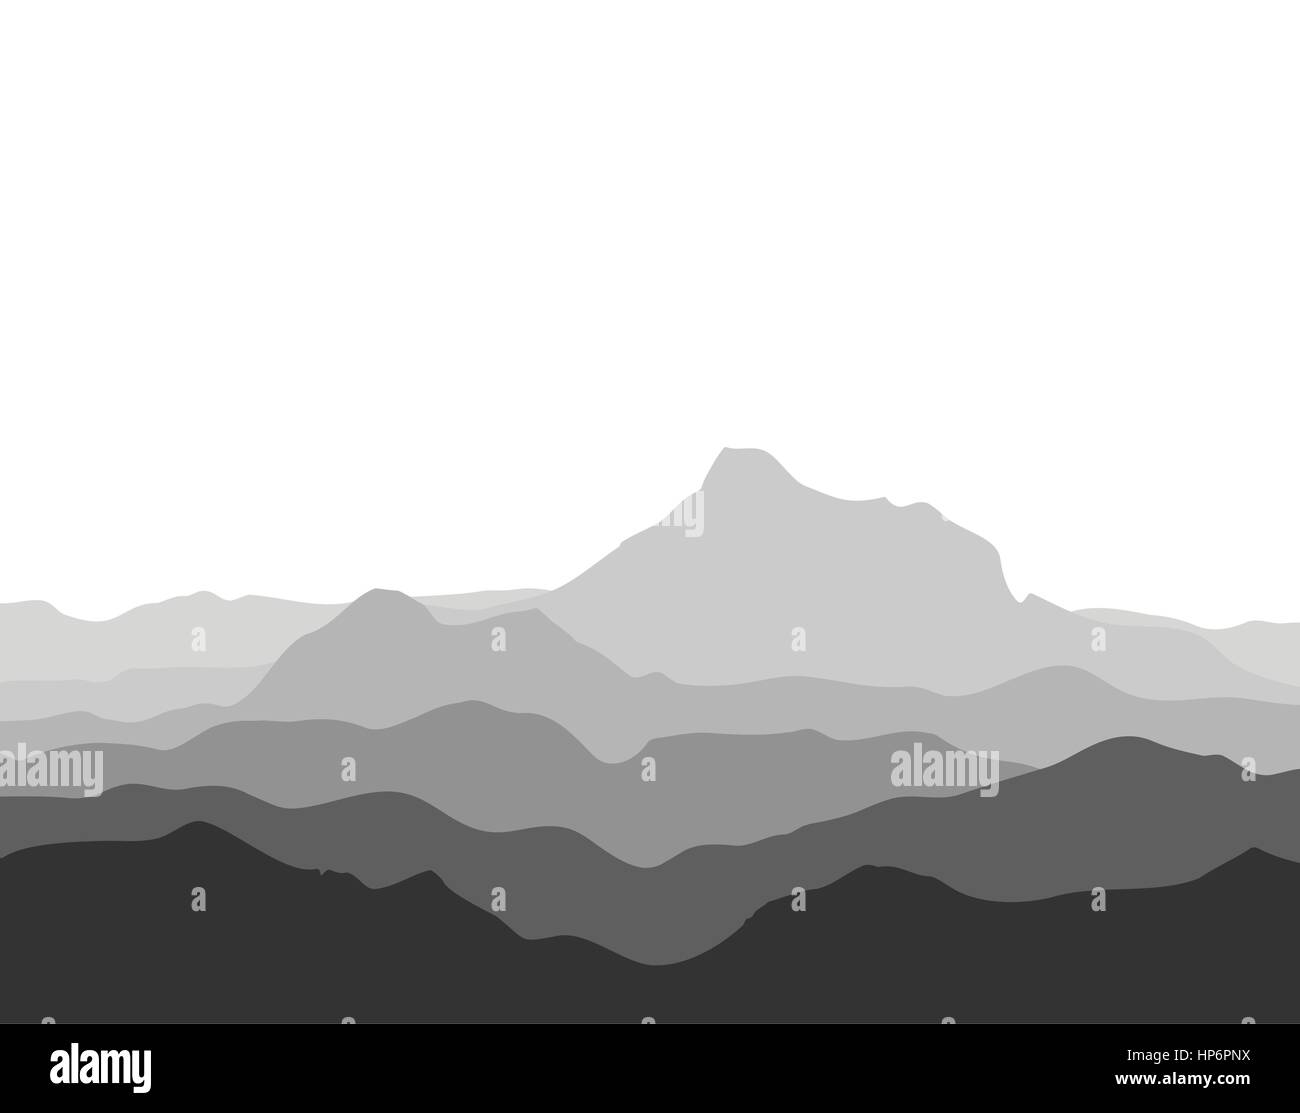 Adventure fund mountain design Royalty Free Vector Image